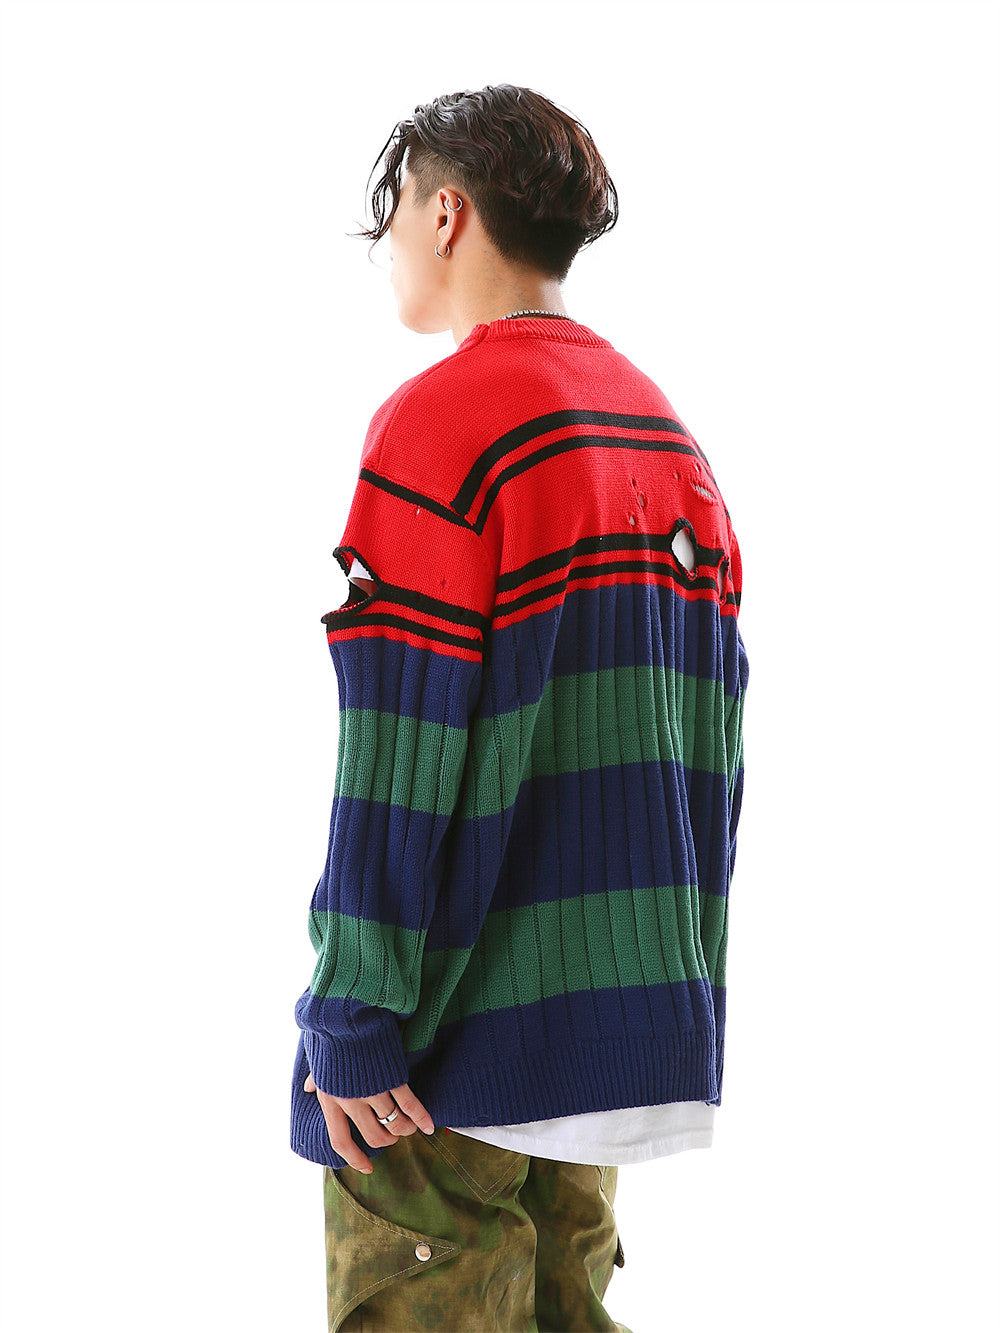 Edgy Elegance: Men's Crochet Ripped Knitted Long Sleeve Sweater